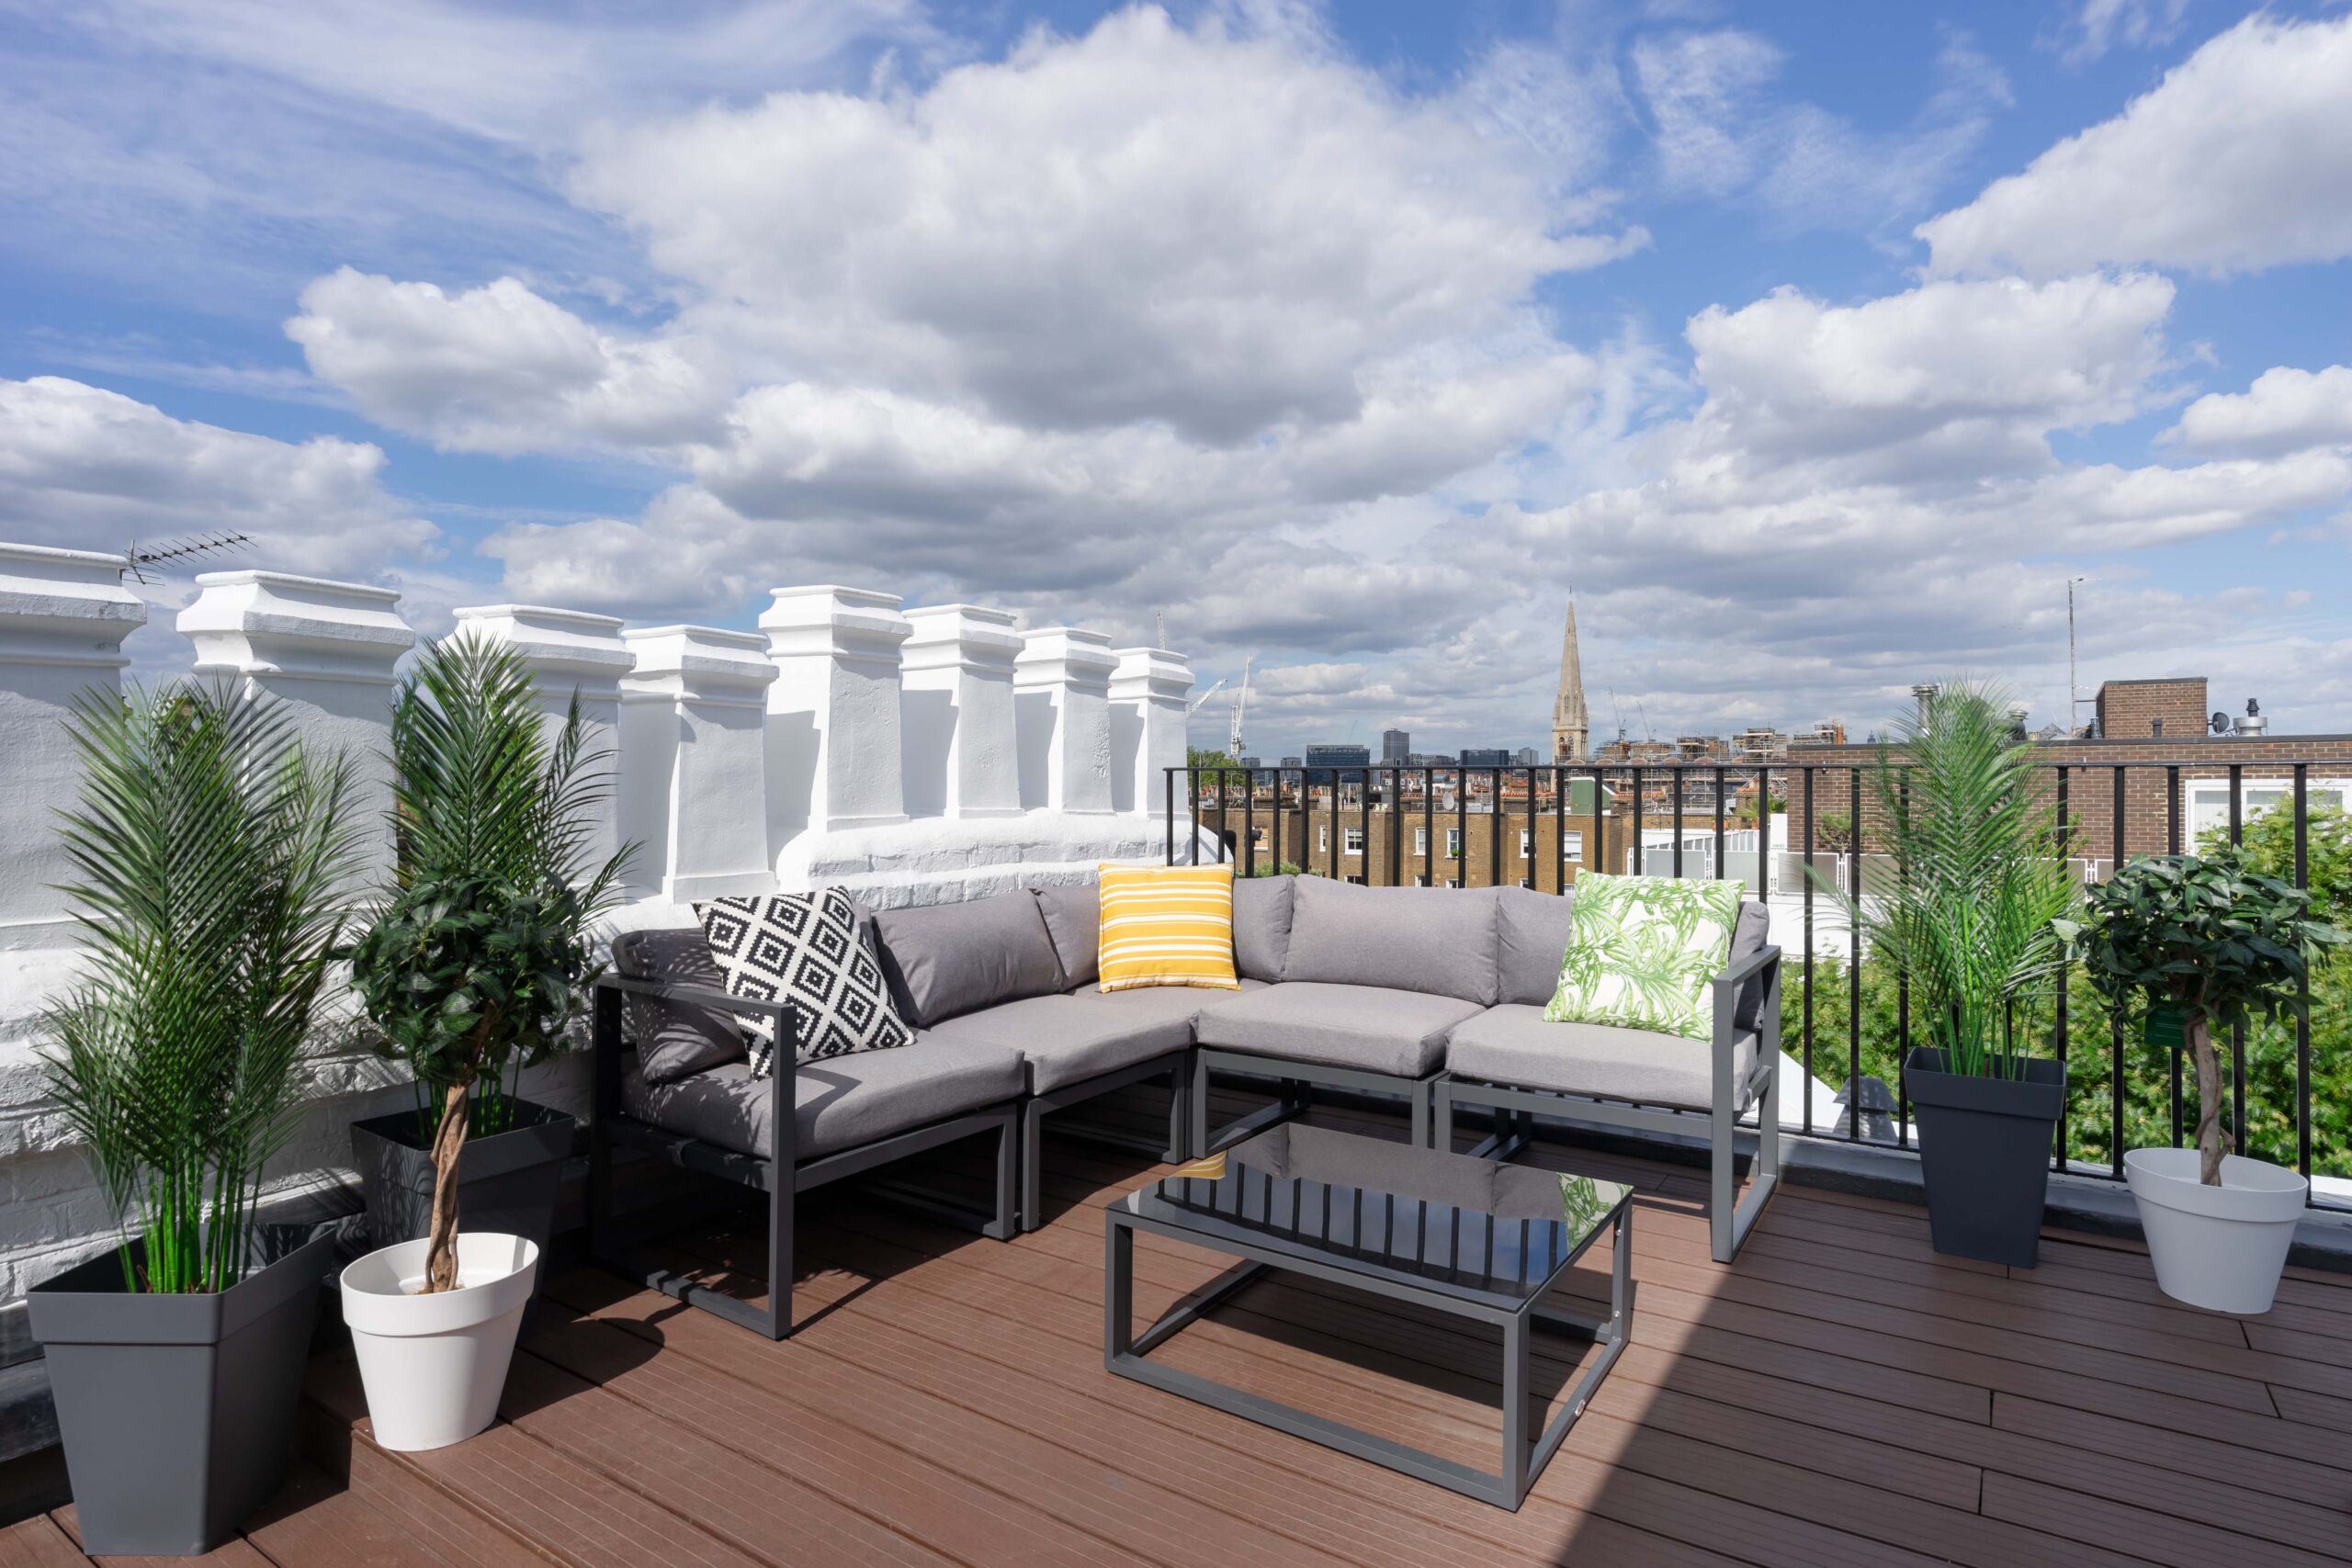 Roof Terrace with outdoors seating area Linden Gardens